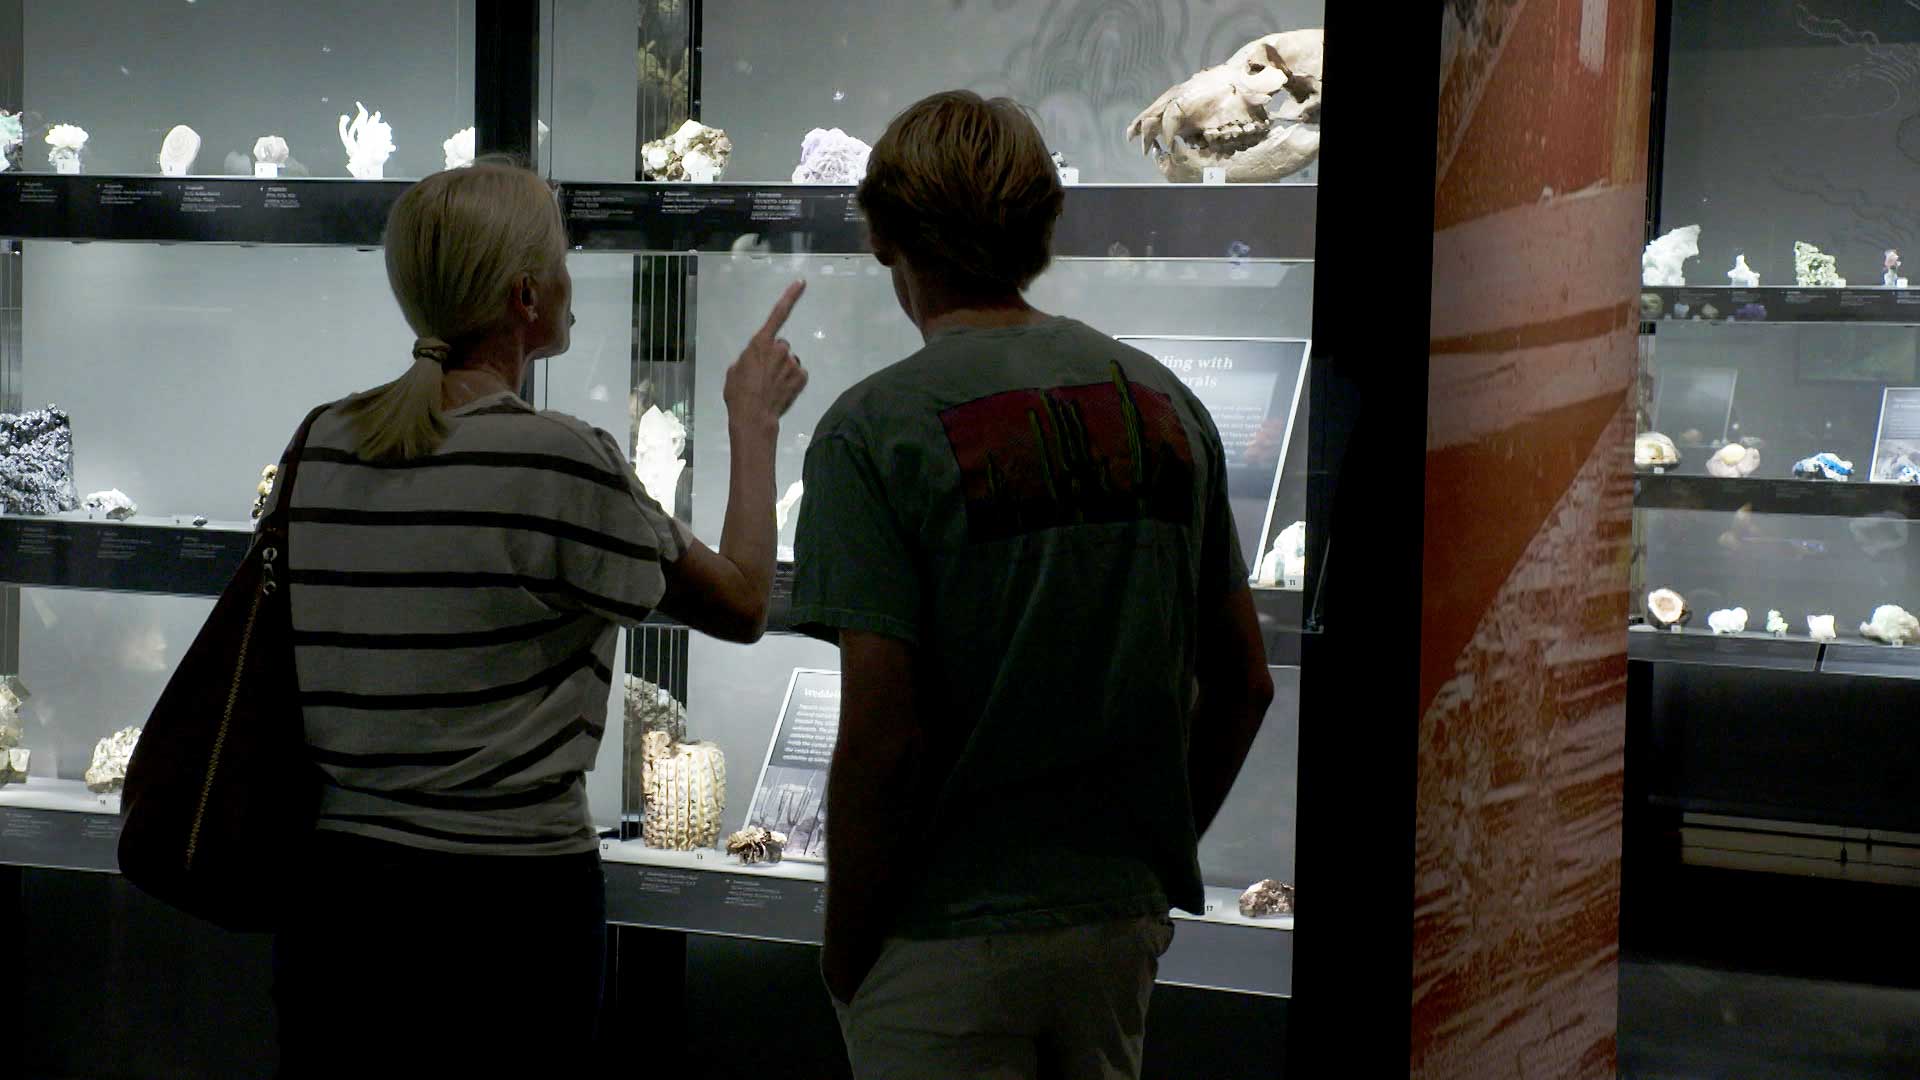 Visitors examine displays at the University of Arizona Alfie Norville Gem and Mineral Museum's new location in downtown Tucson. July 2021. 